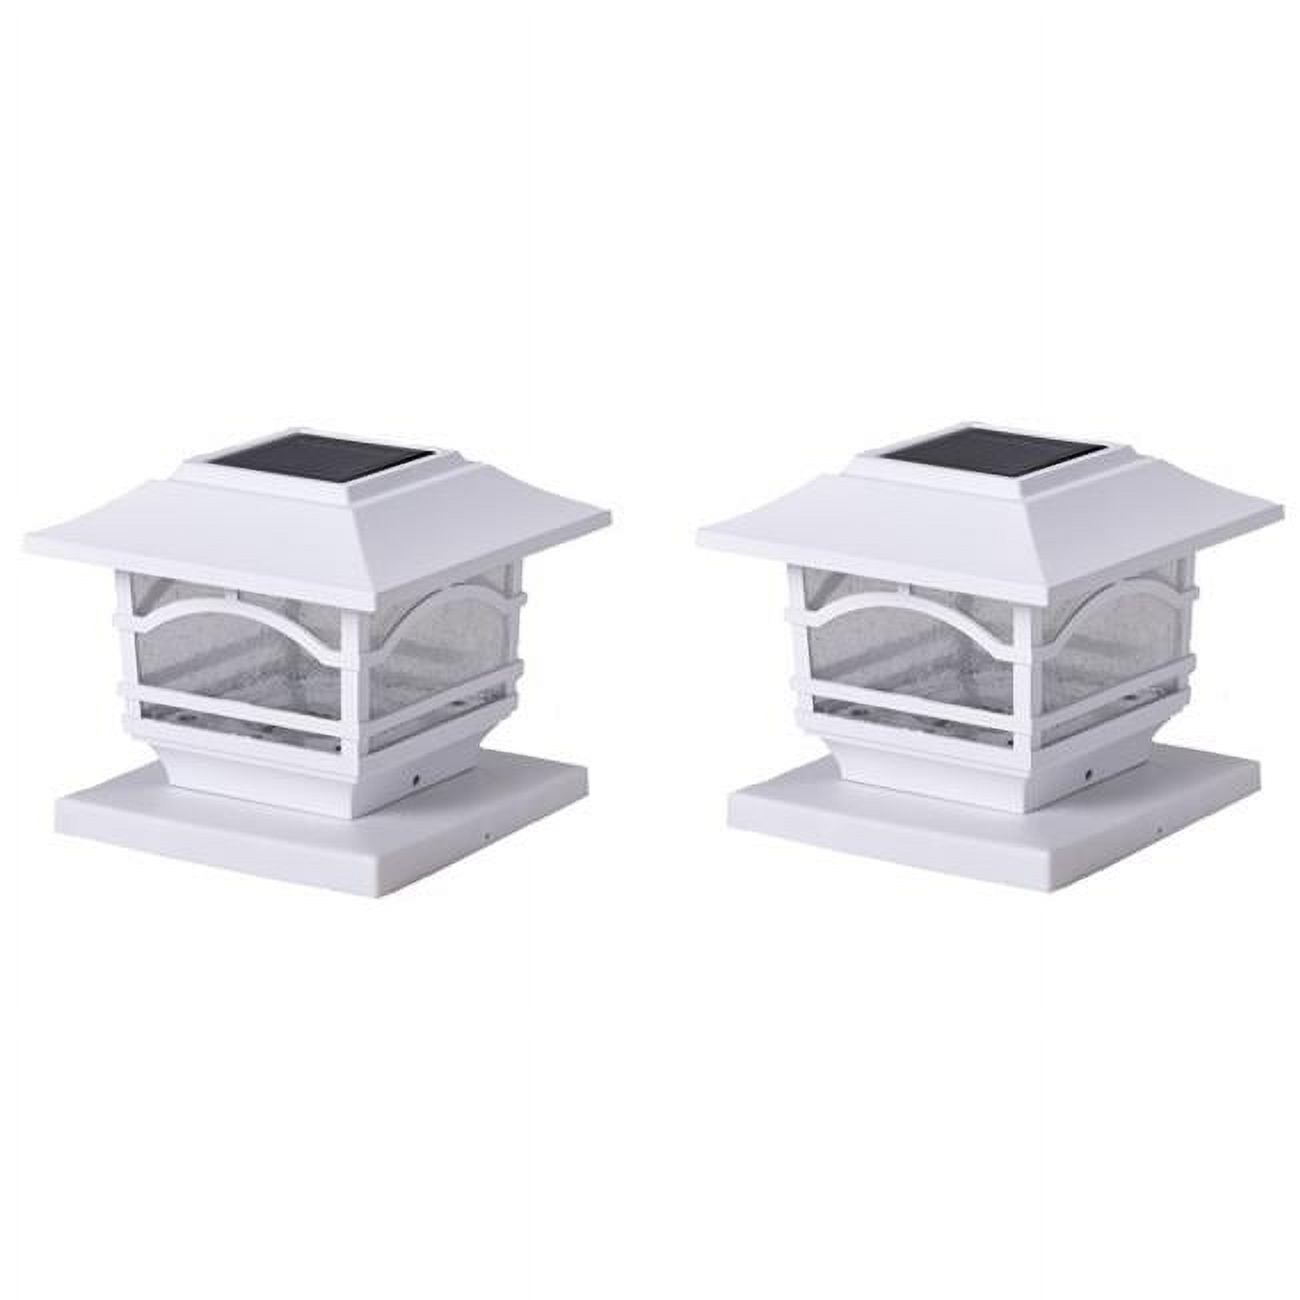 Maxsa® Innovations Maxsa Innovations 41971 Solar Post Cap And Deck Railing Lights 2 Pack (White) - image 1 of 3